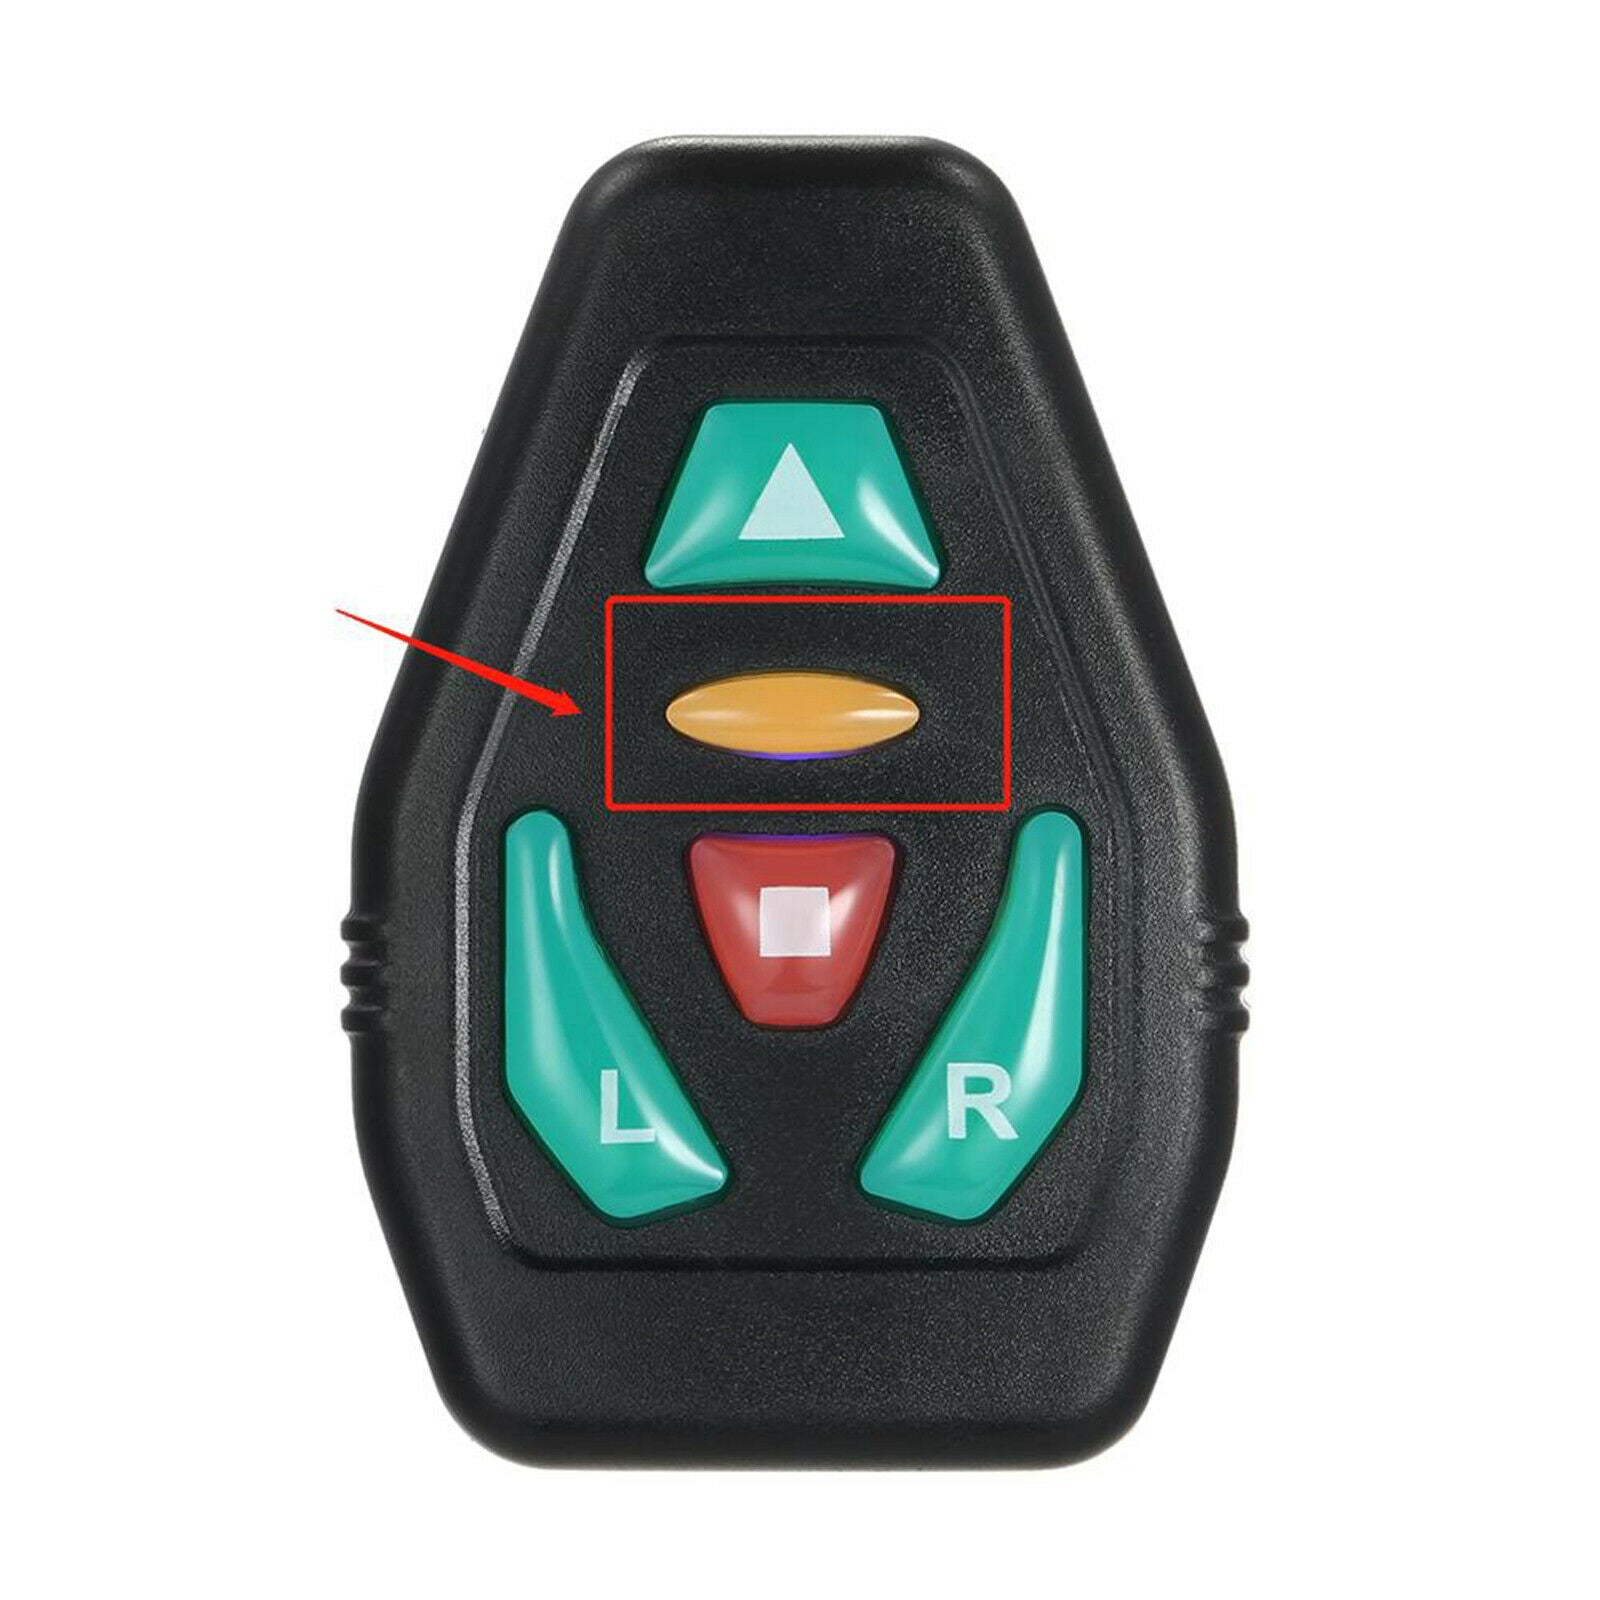 4-Mode Turn Signal Vest Waterproof Remote Direction Indicator Backpack Pack